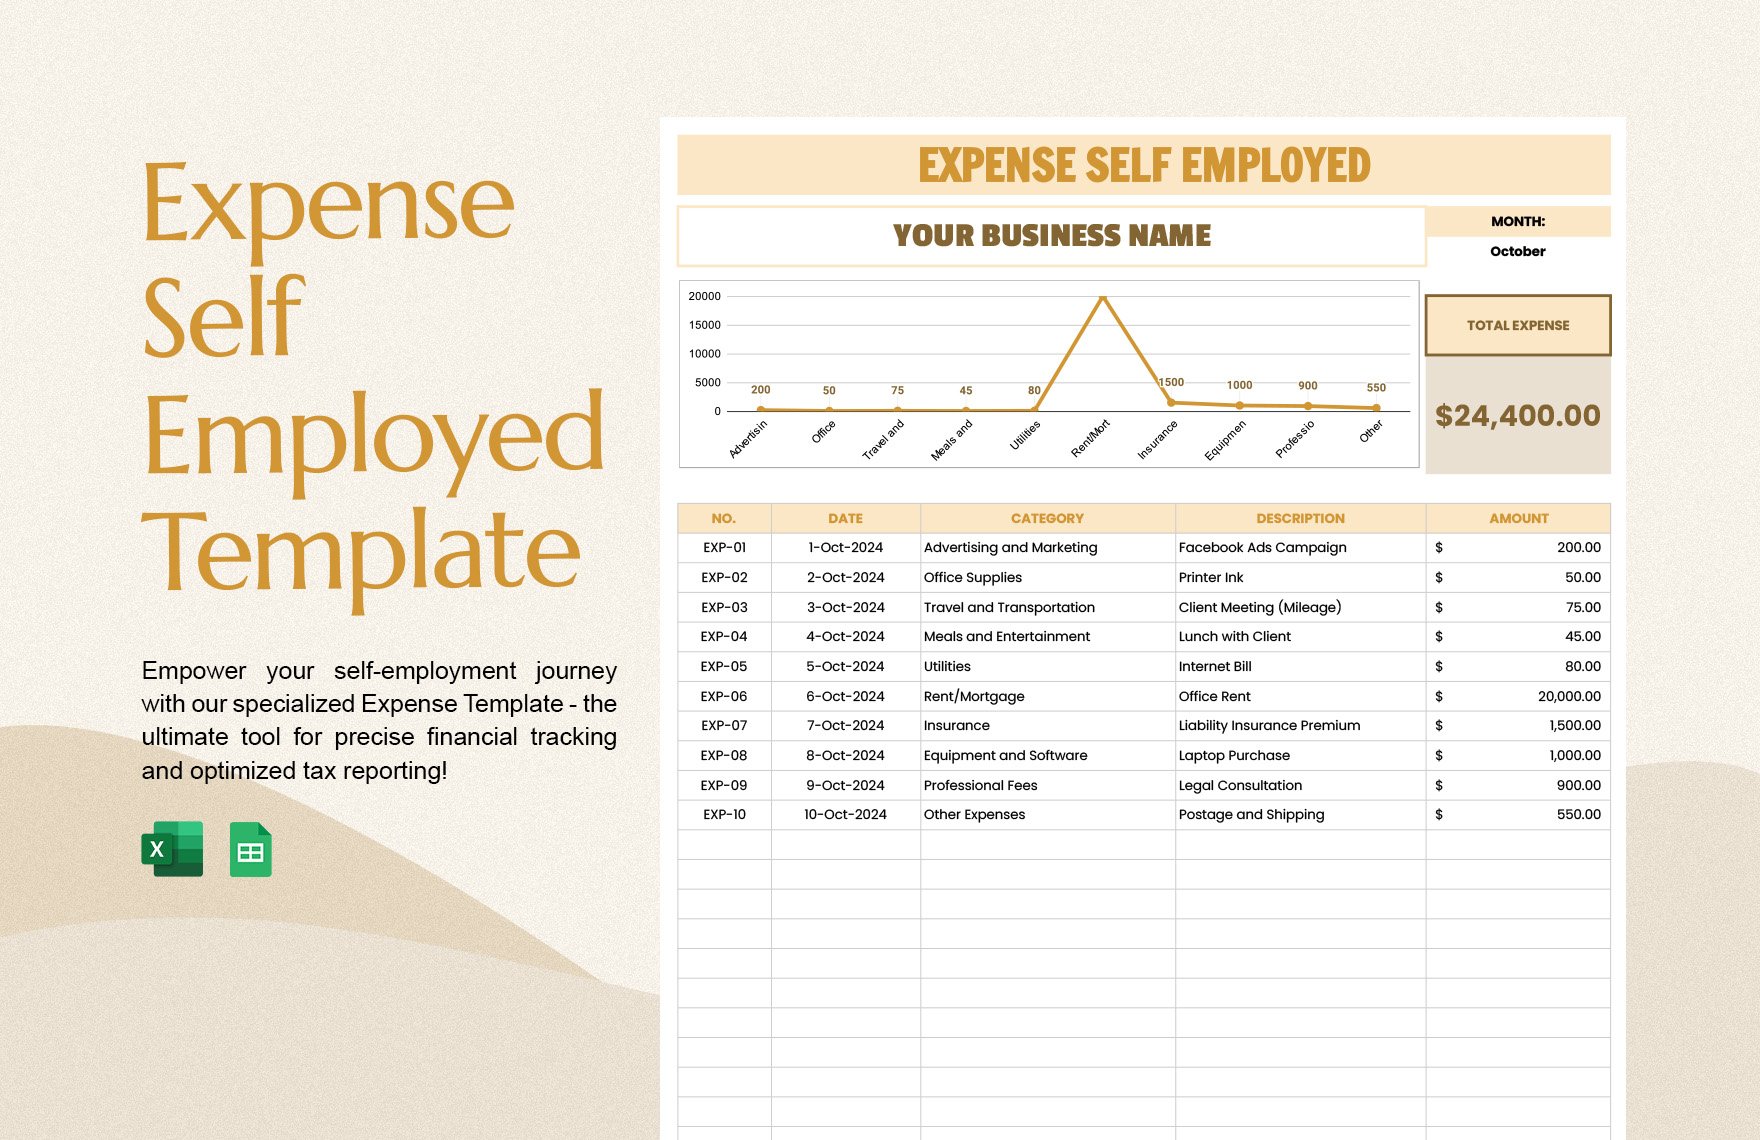 Expense Self Employed Template